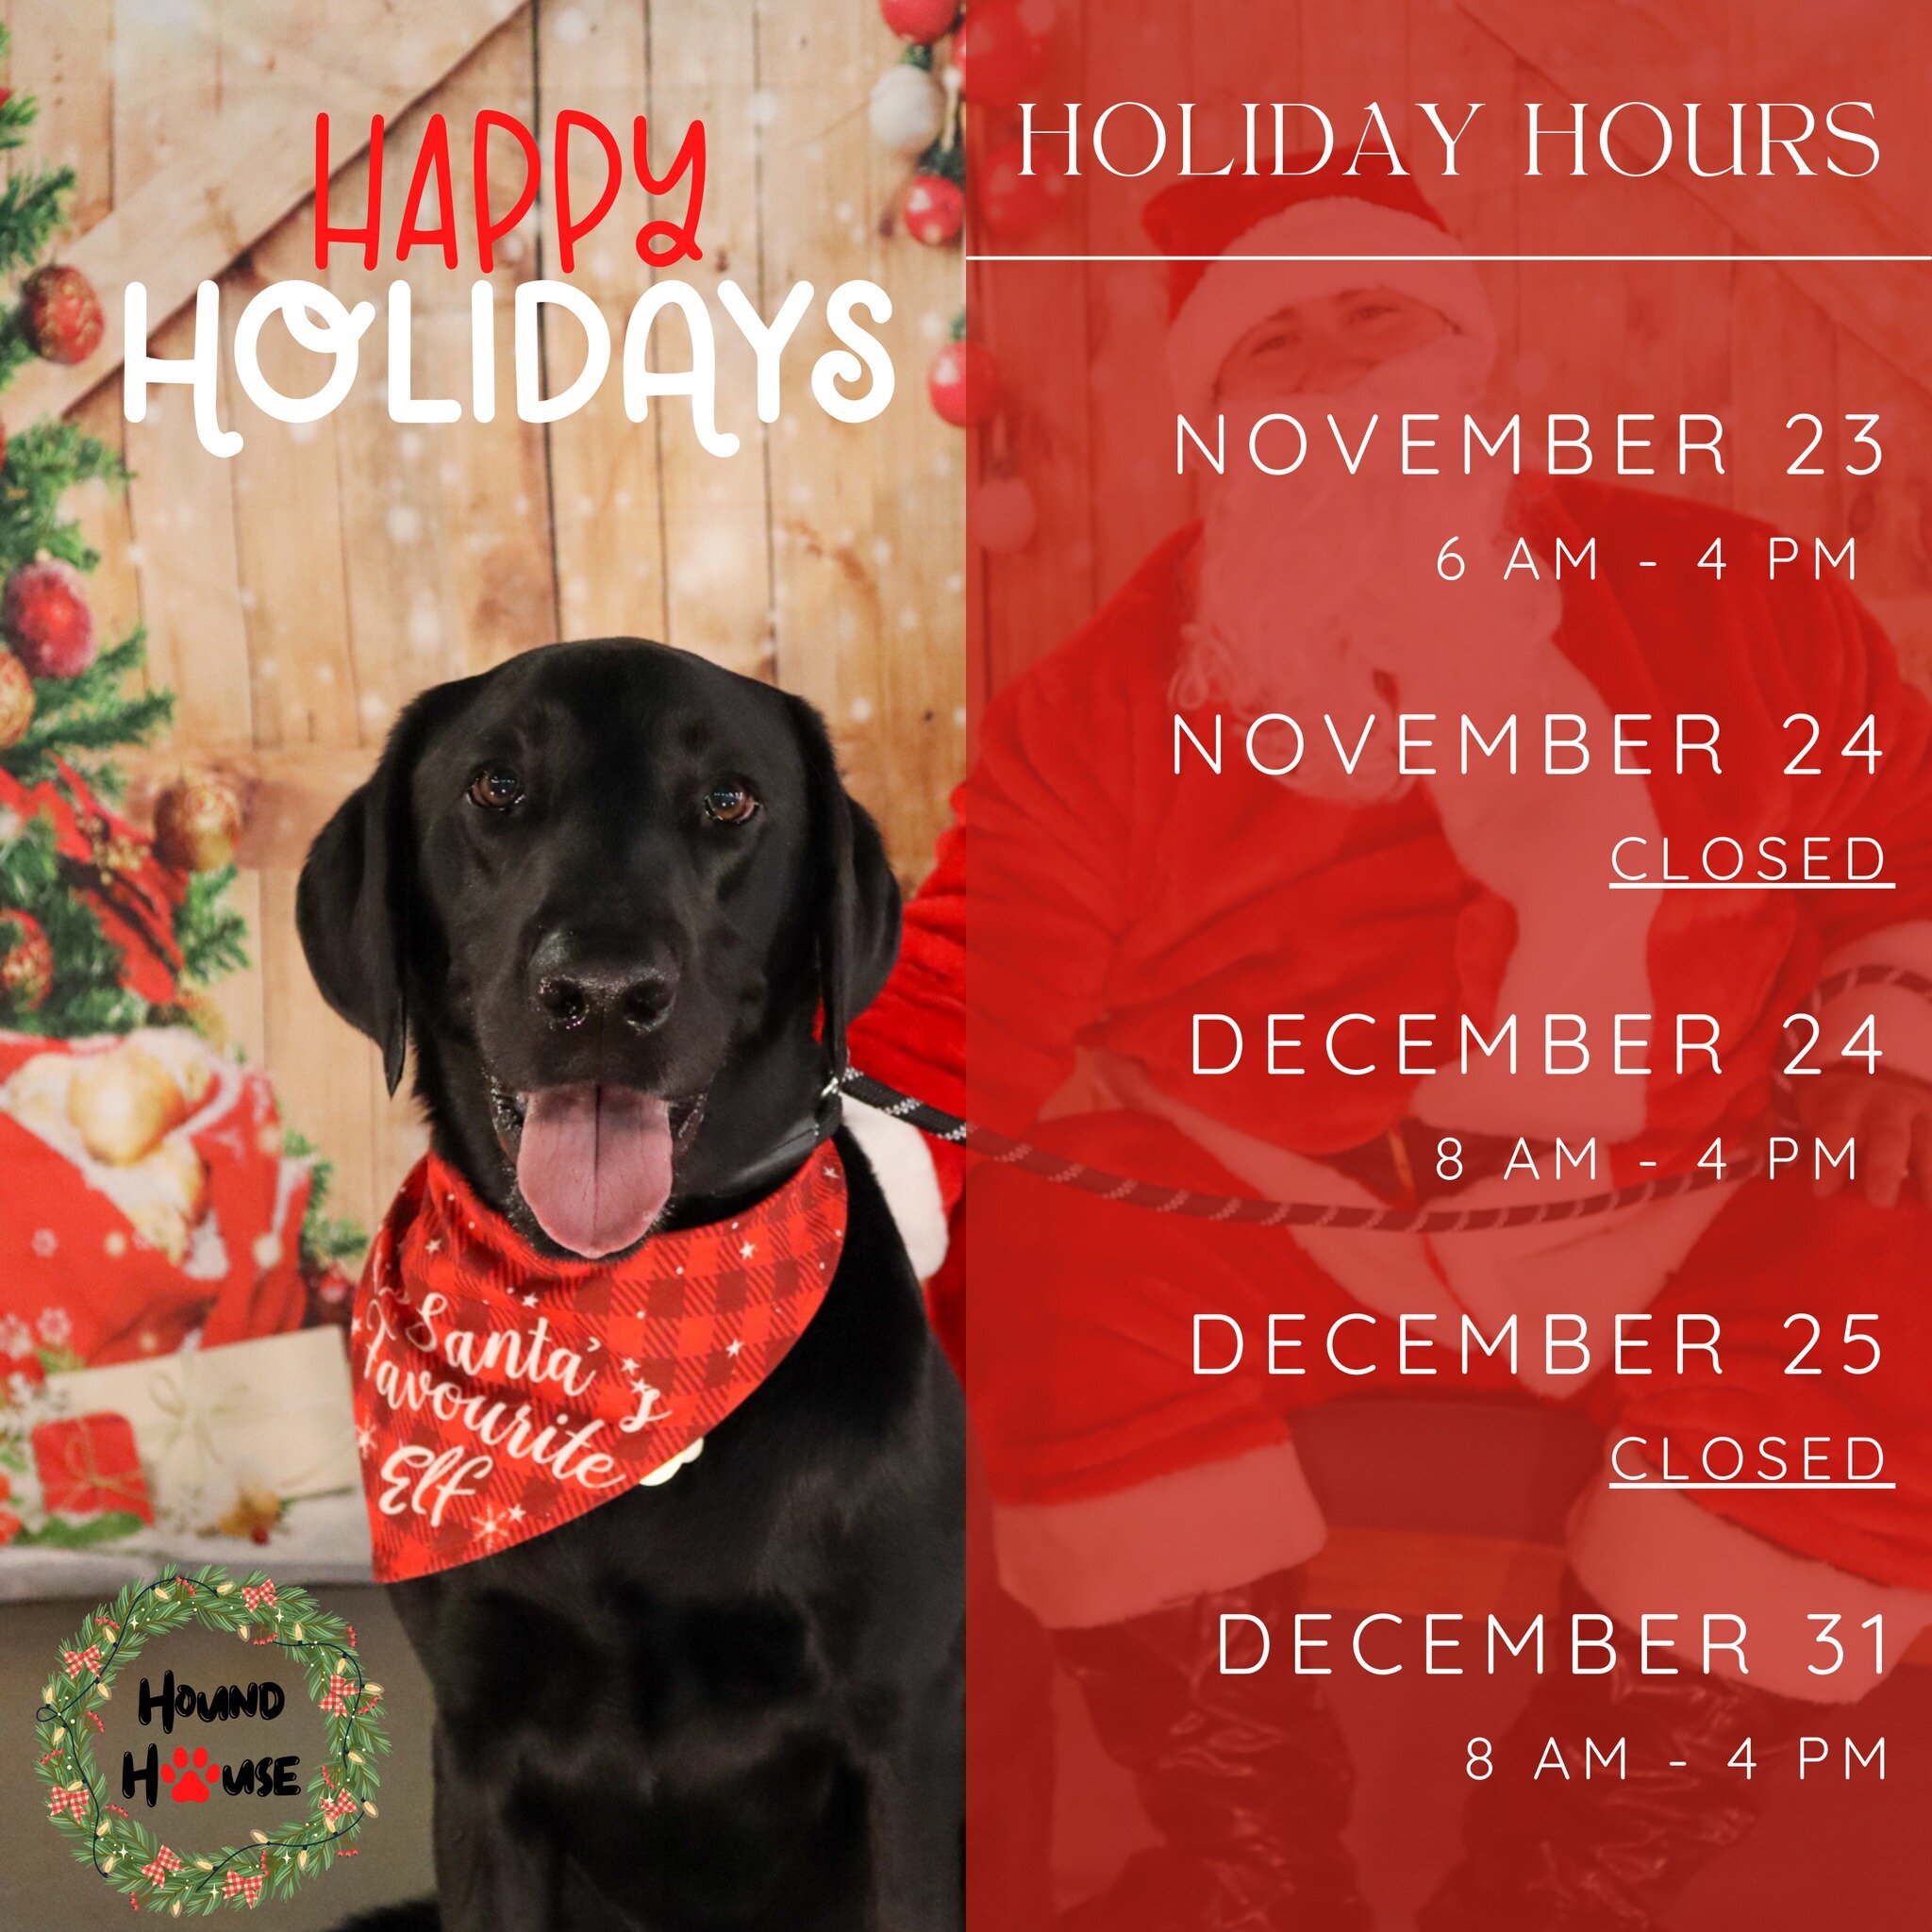 The holiday season is upon us! If you have any questions please let us know! 

 #HHLVFamily #VegasStrong #dogslife #dogsofinstagram #dogoftheday #bestoflasvegas #doggiedaycare #vegas #dogsofinsta #dogdaycare #smallbusiness #houndhouselv #dogsoffacebo